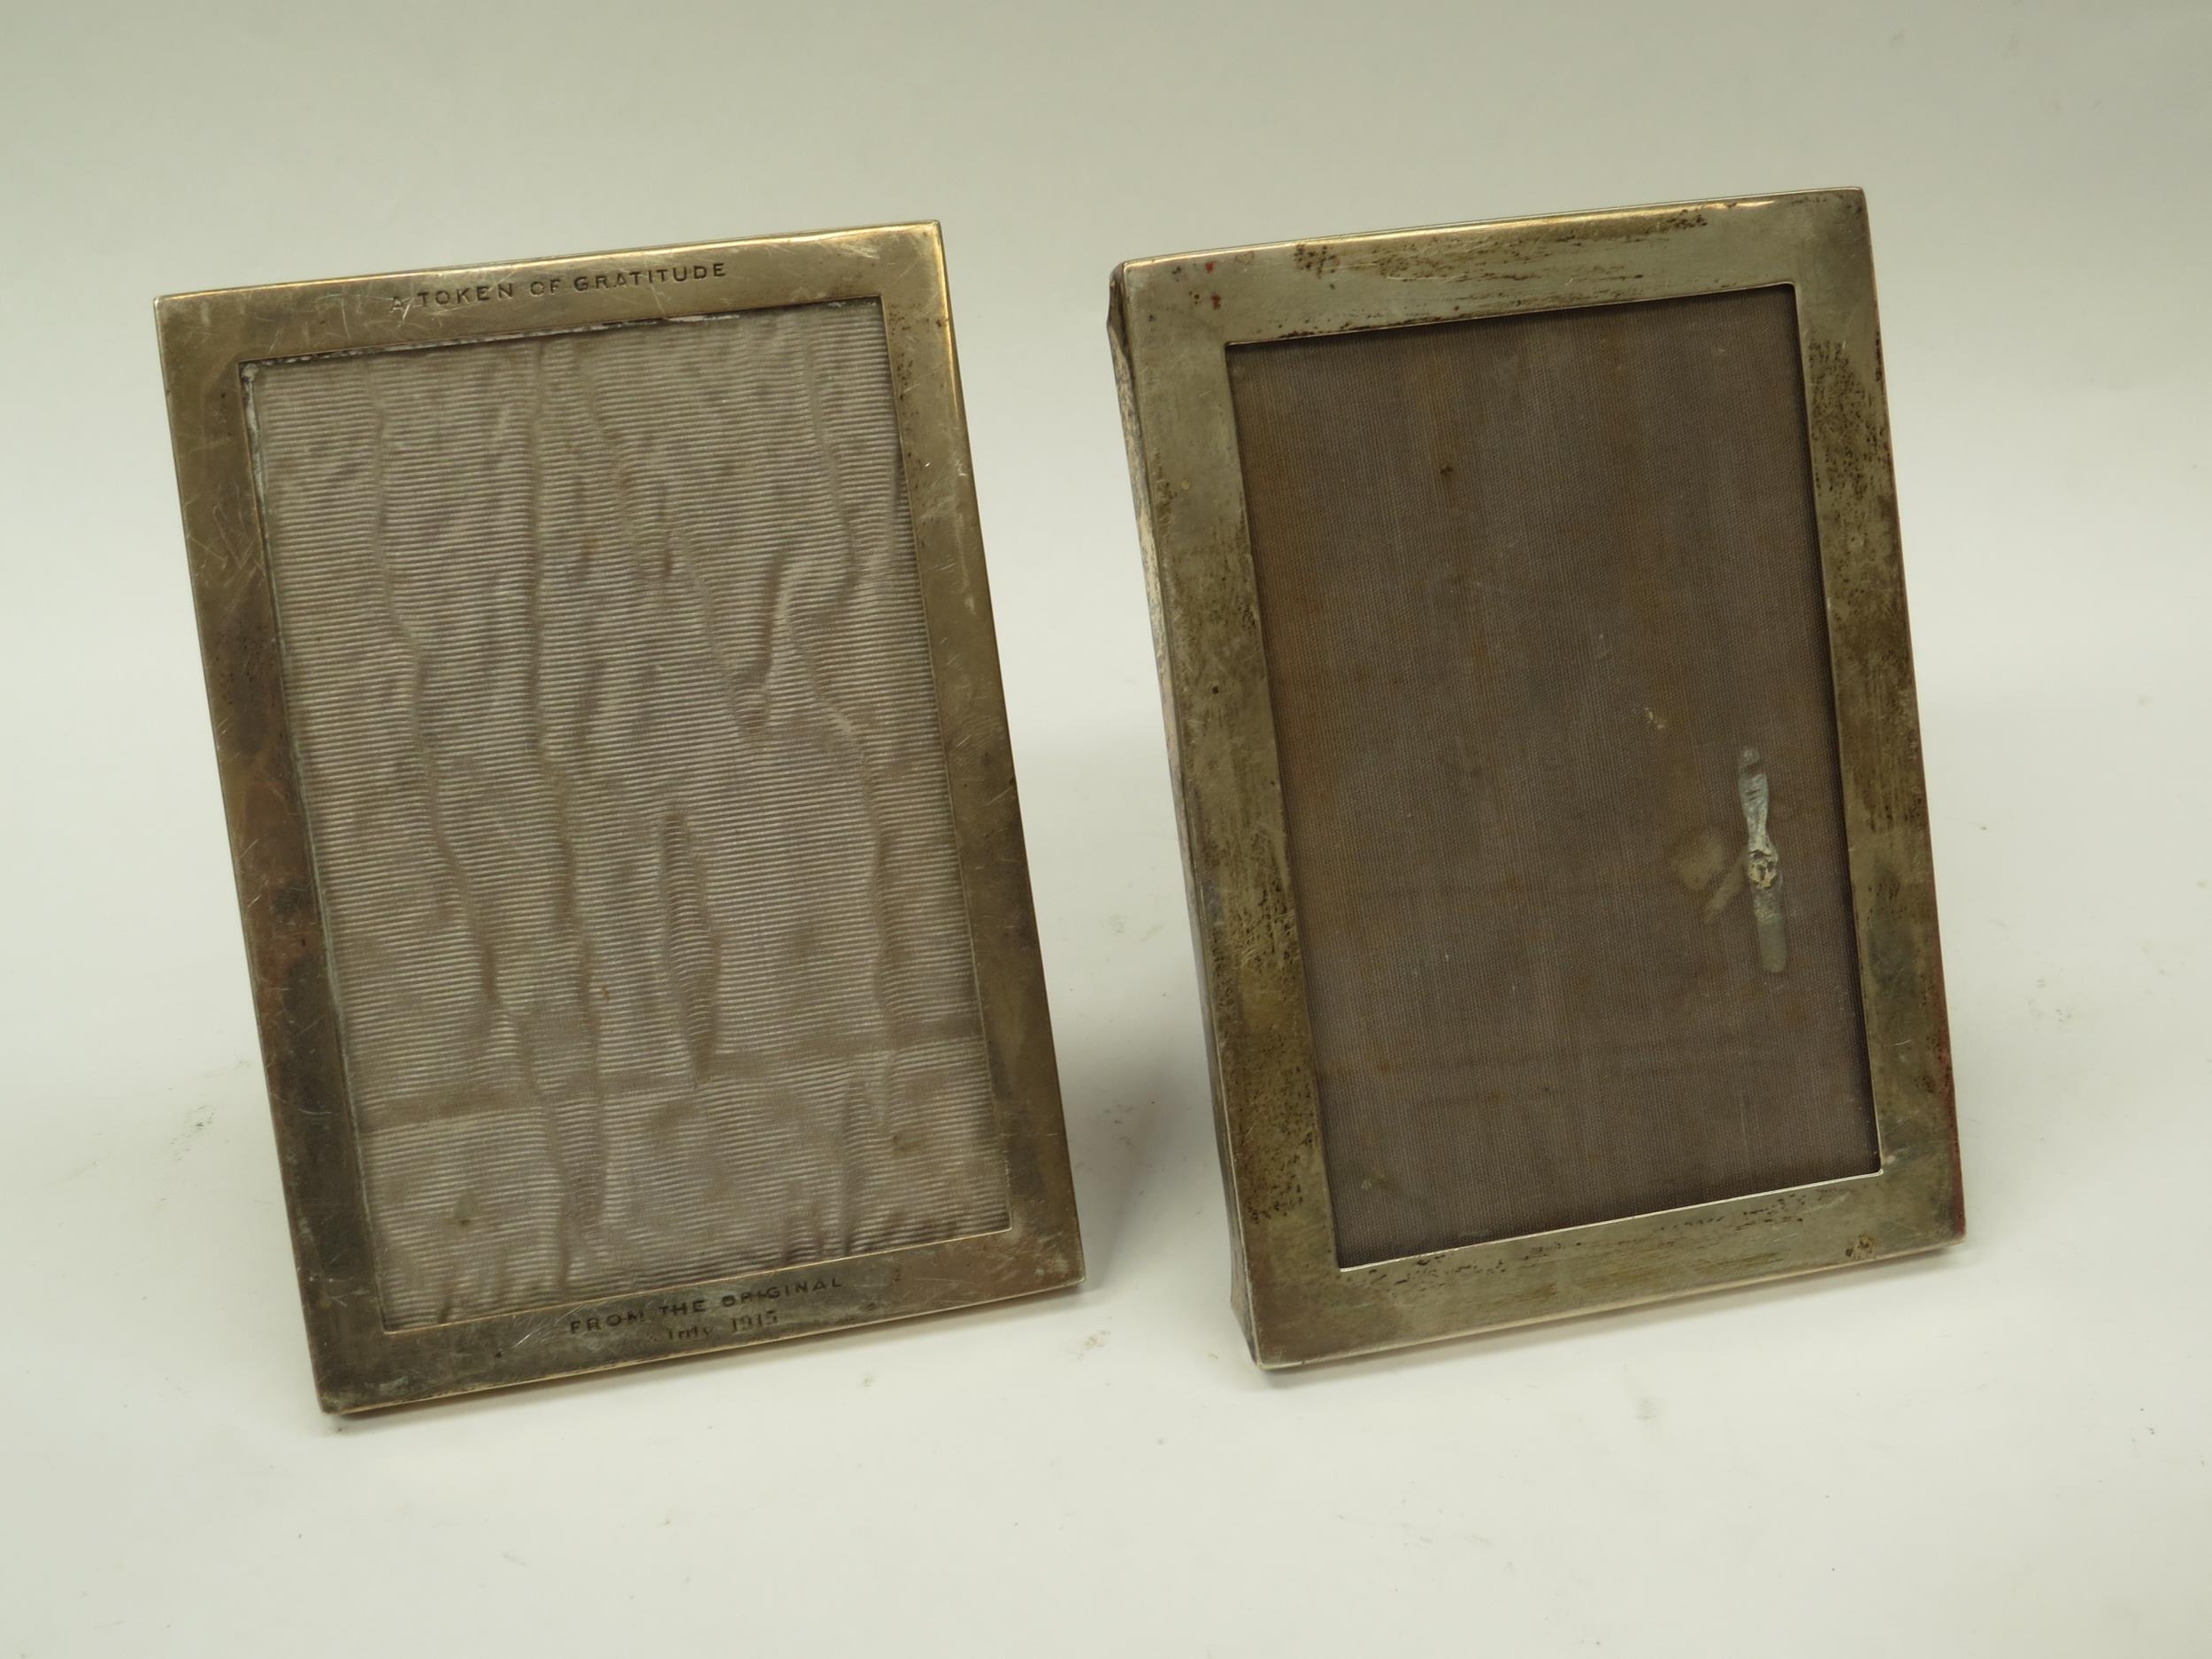 A near pair of William Neale silver photograph frames, one with inscription "A token of gratitude